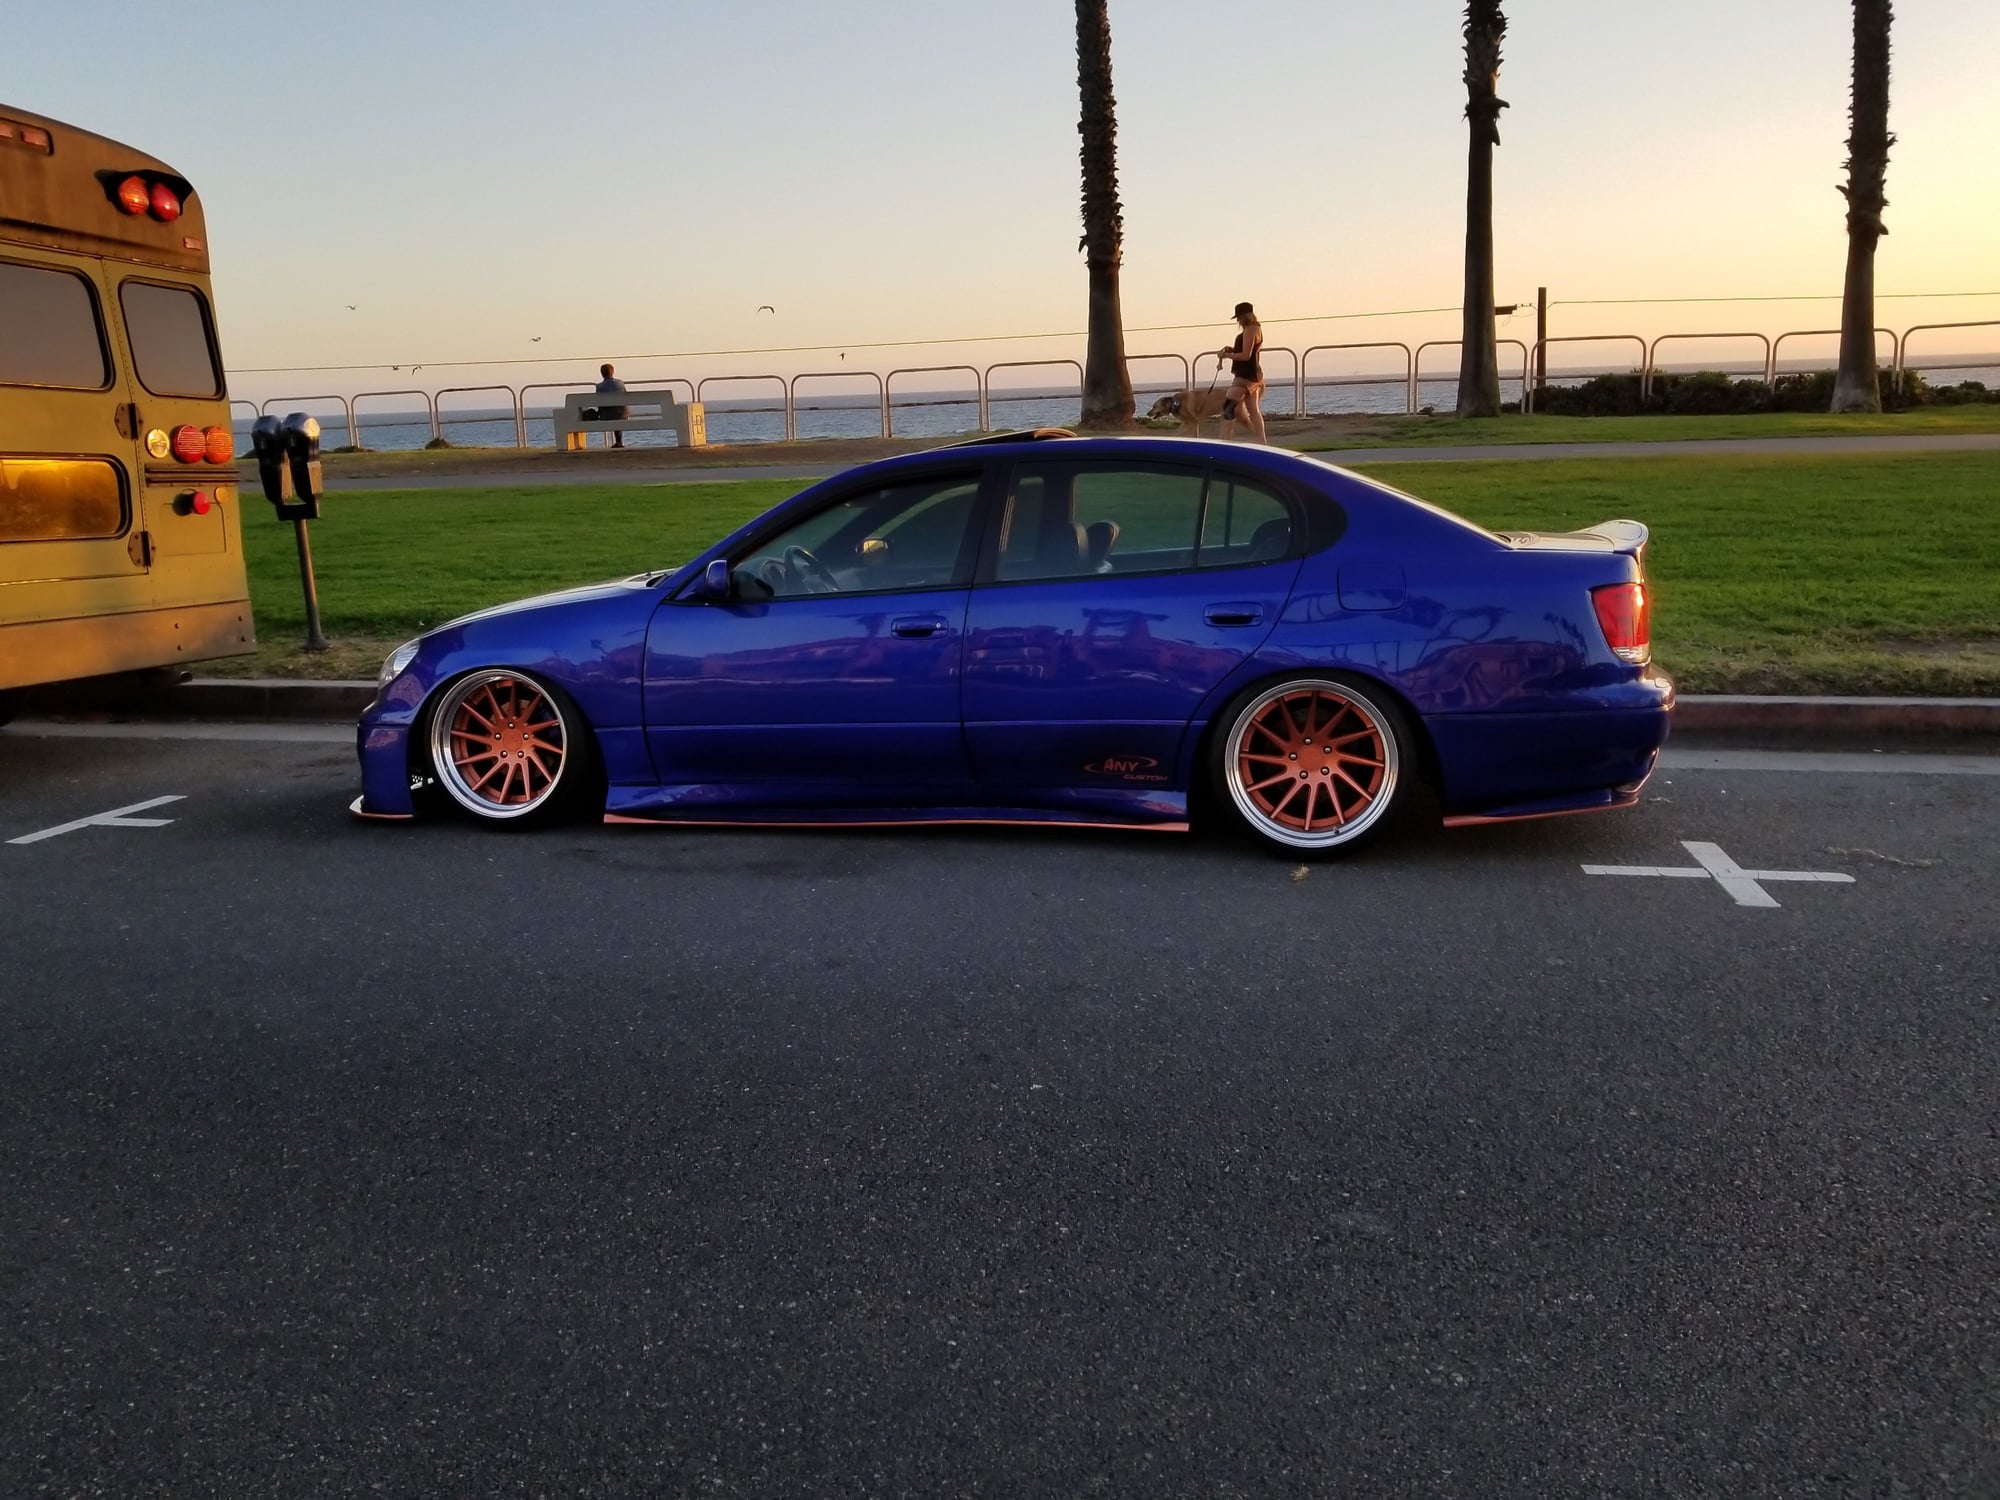 2000 Lexus GS300 - Widebody GS former show car for sale - Used - VIN Jt8bd68s0y0107517 - 200,000 Miles - 6 cyl - 2WD - Automatic - Sedan - Blue - Garden Grove, CA 92840, United States